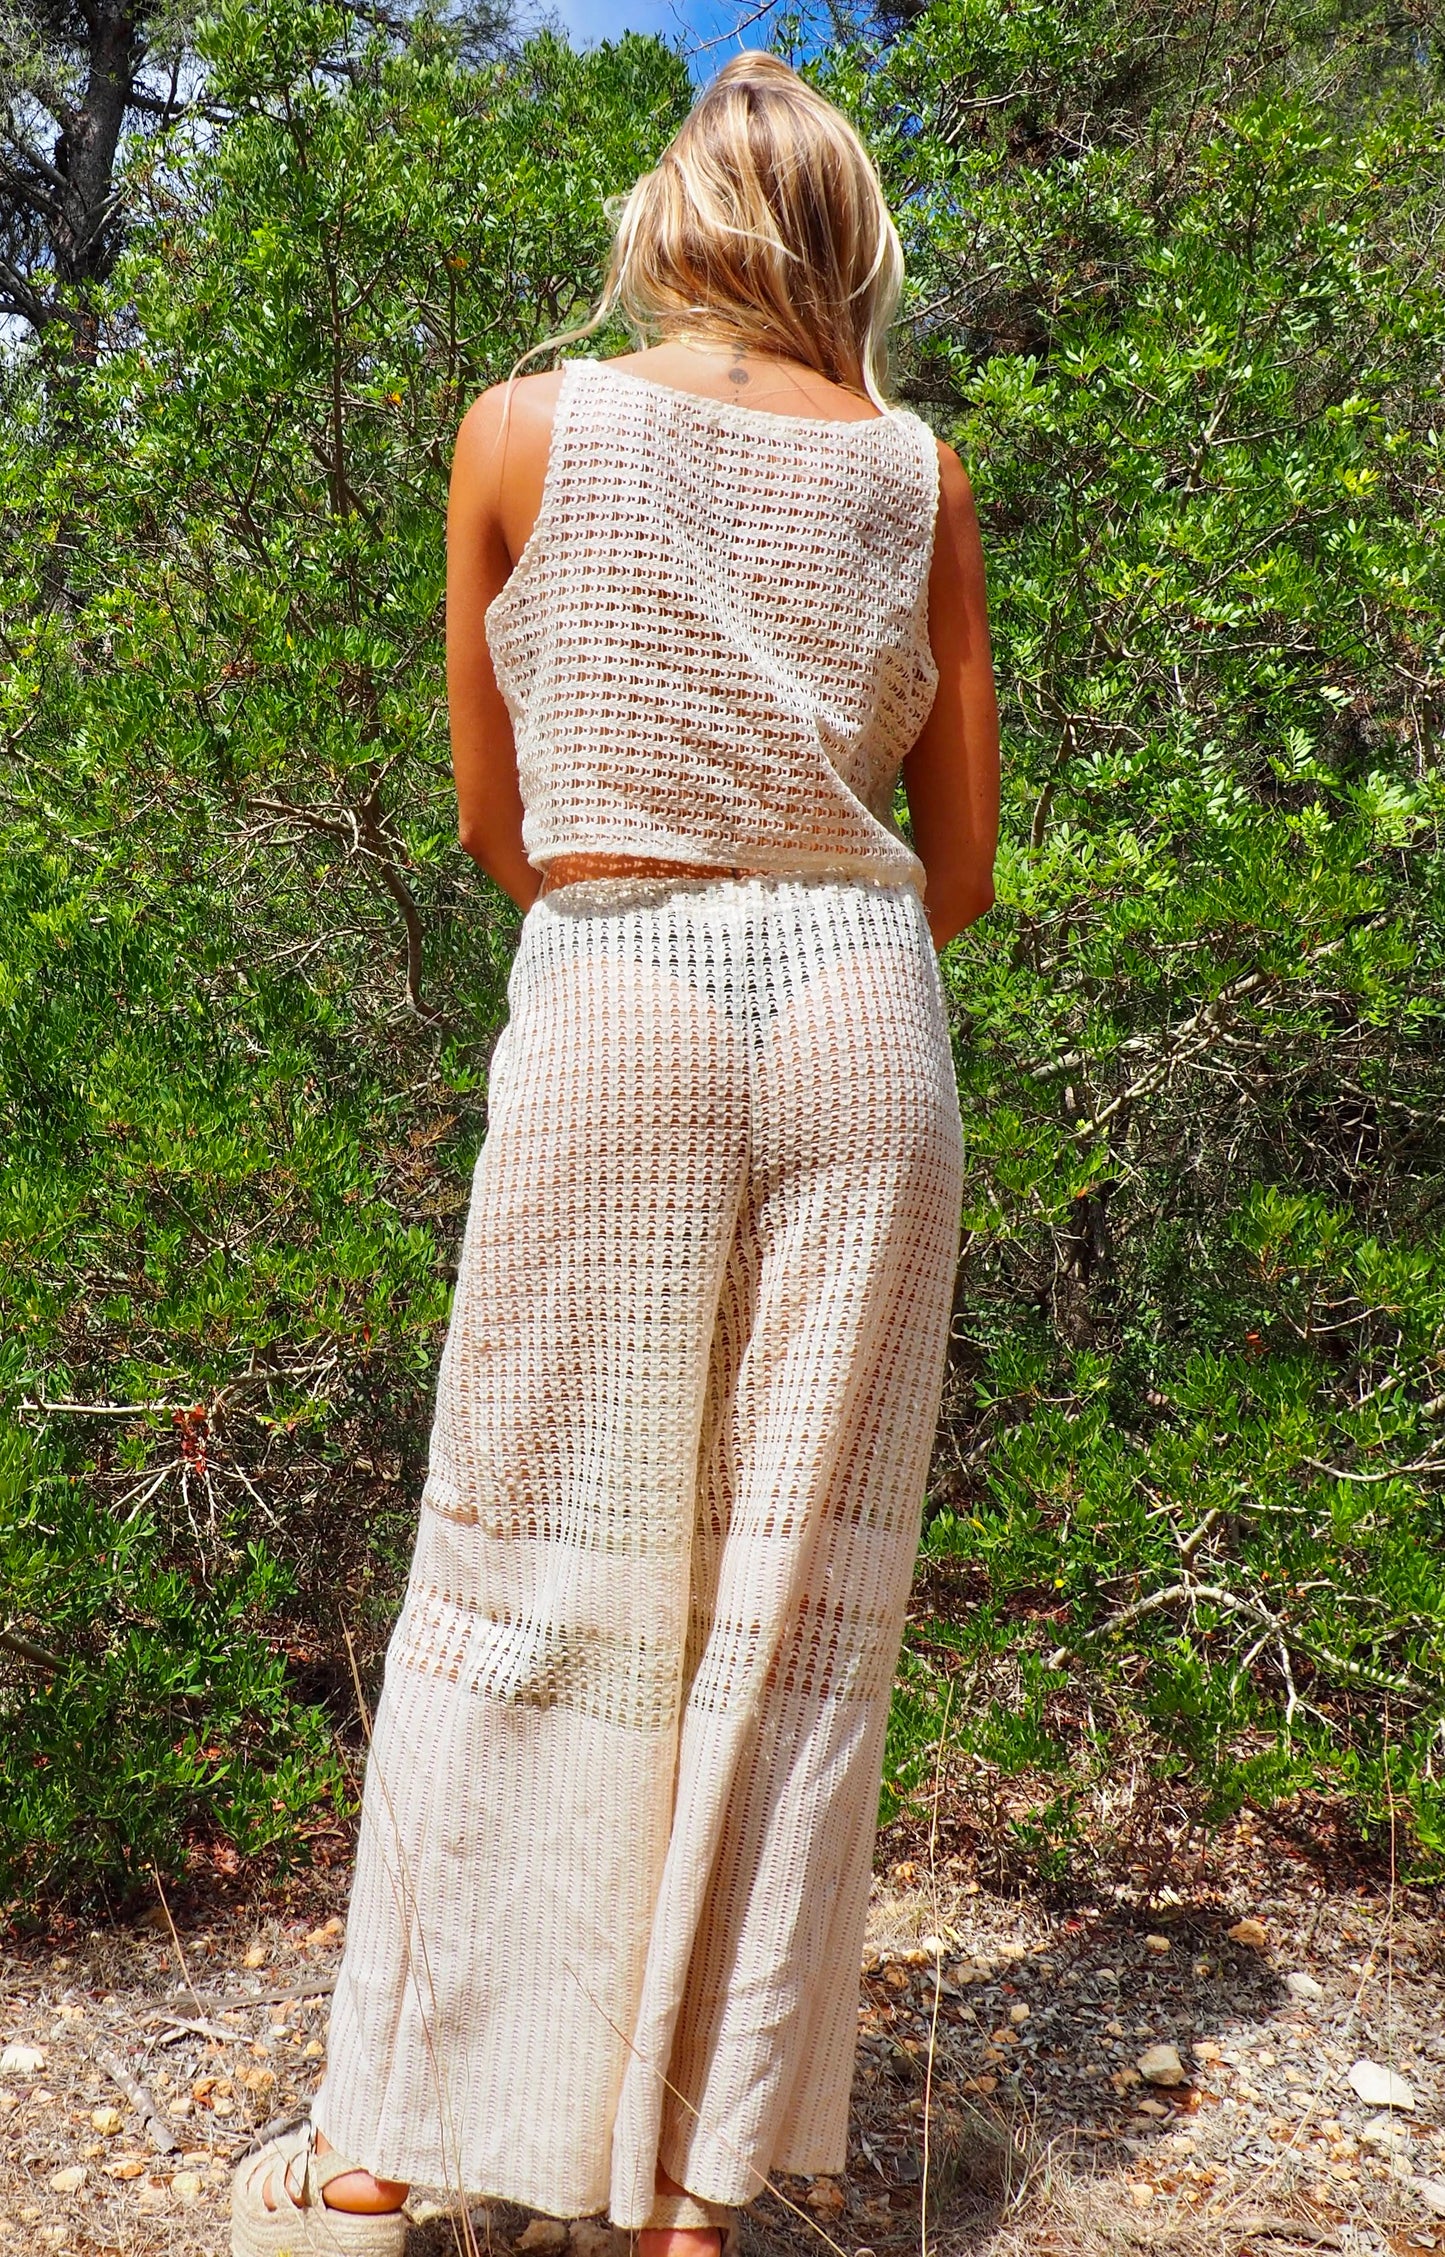 Up-cycled cream mesh woven shear crop top vest by Vagabond Ibiza